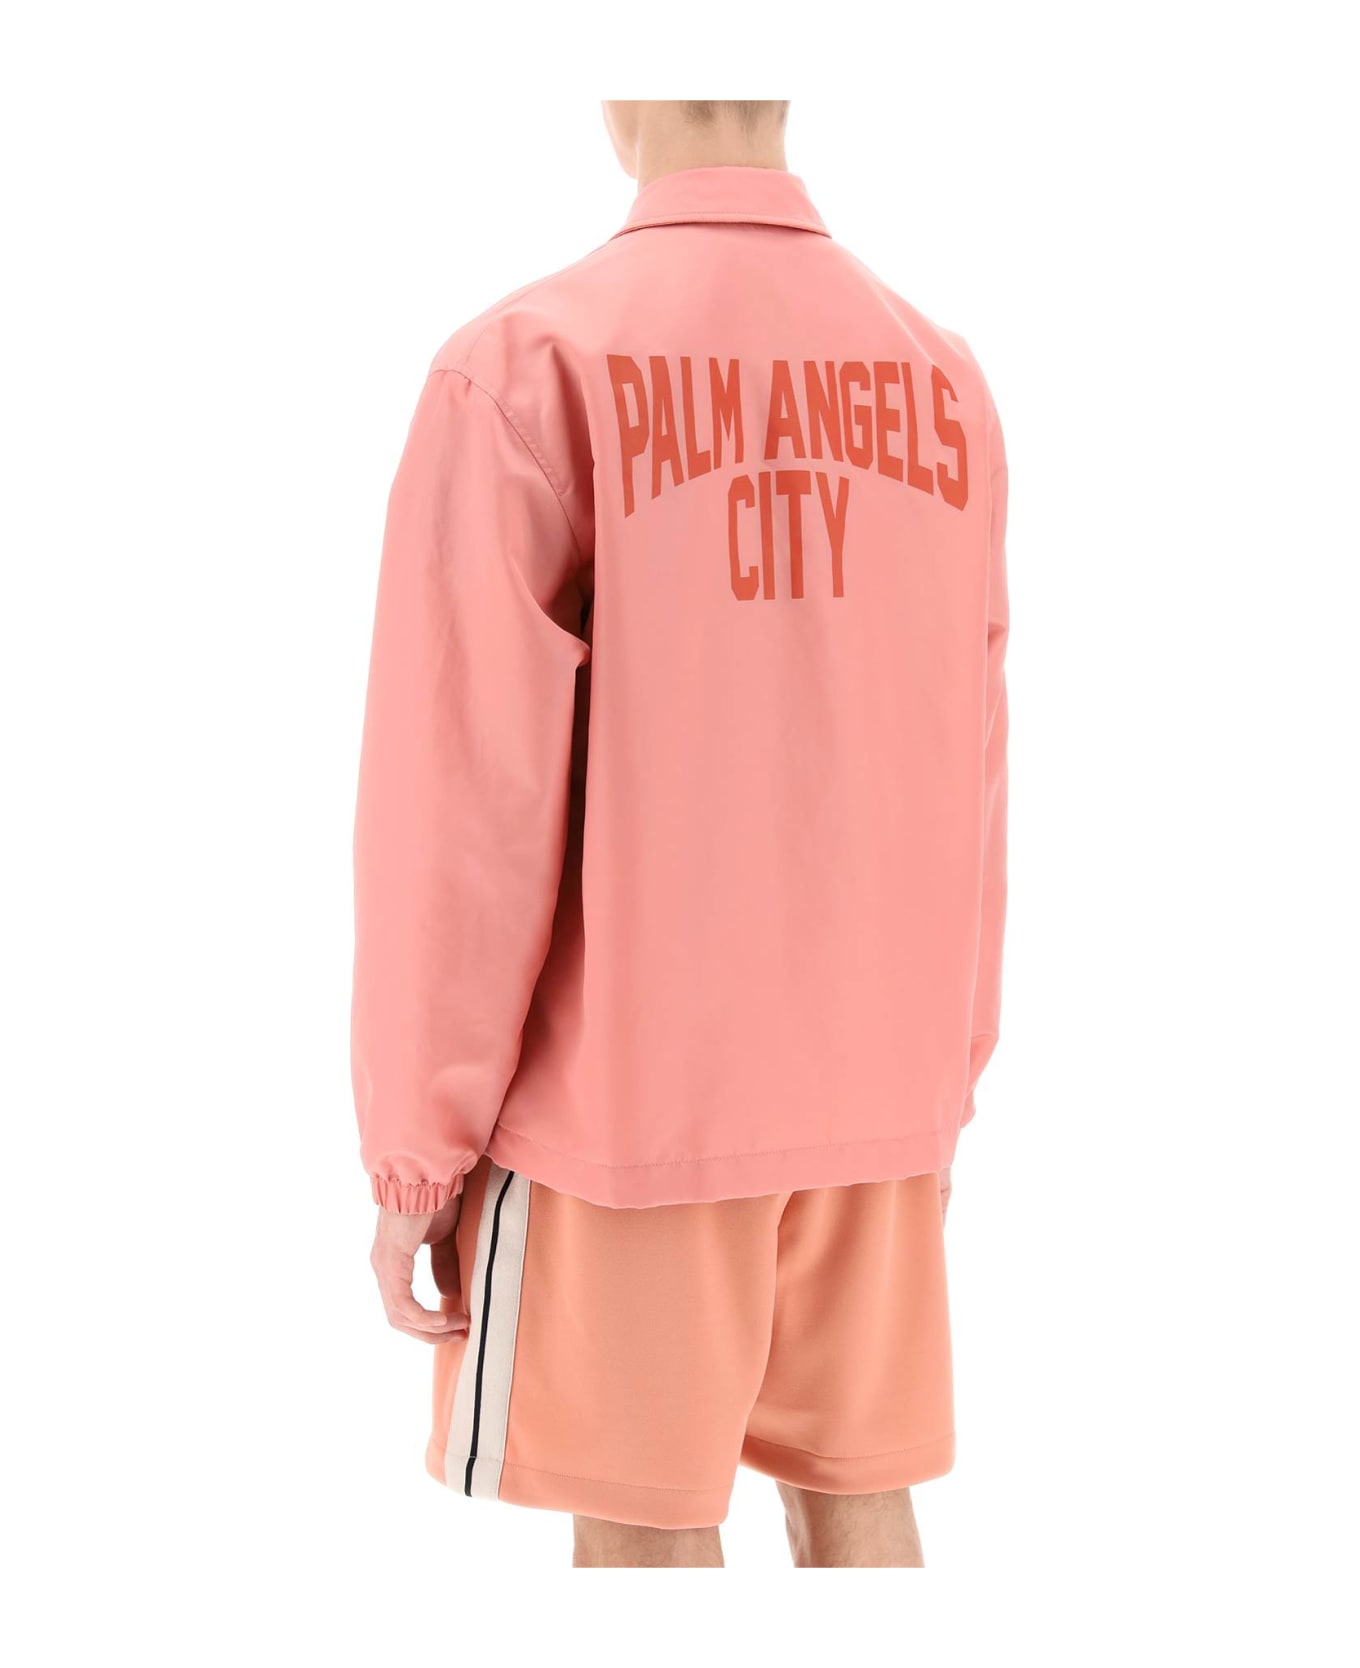 Palm Angels Pa City Coach Jacket - PINK RED (Pink)